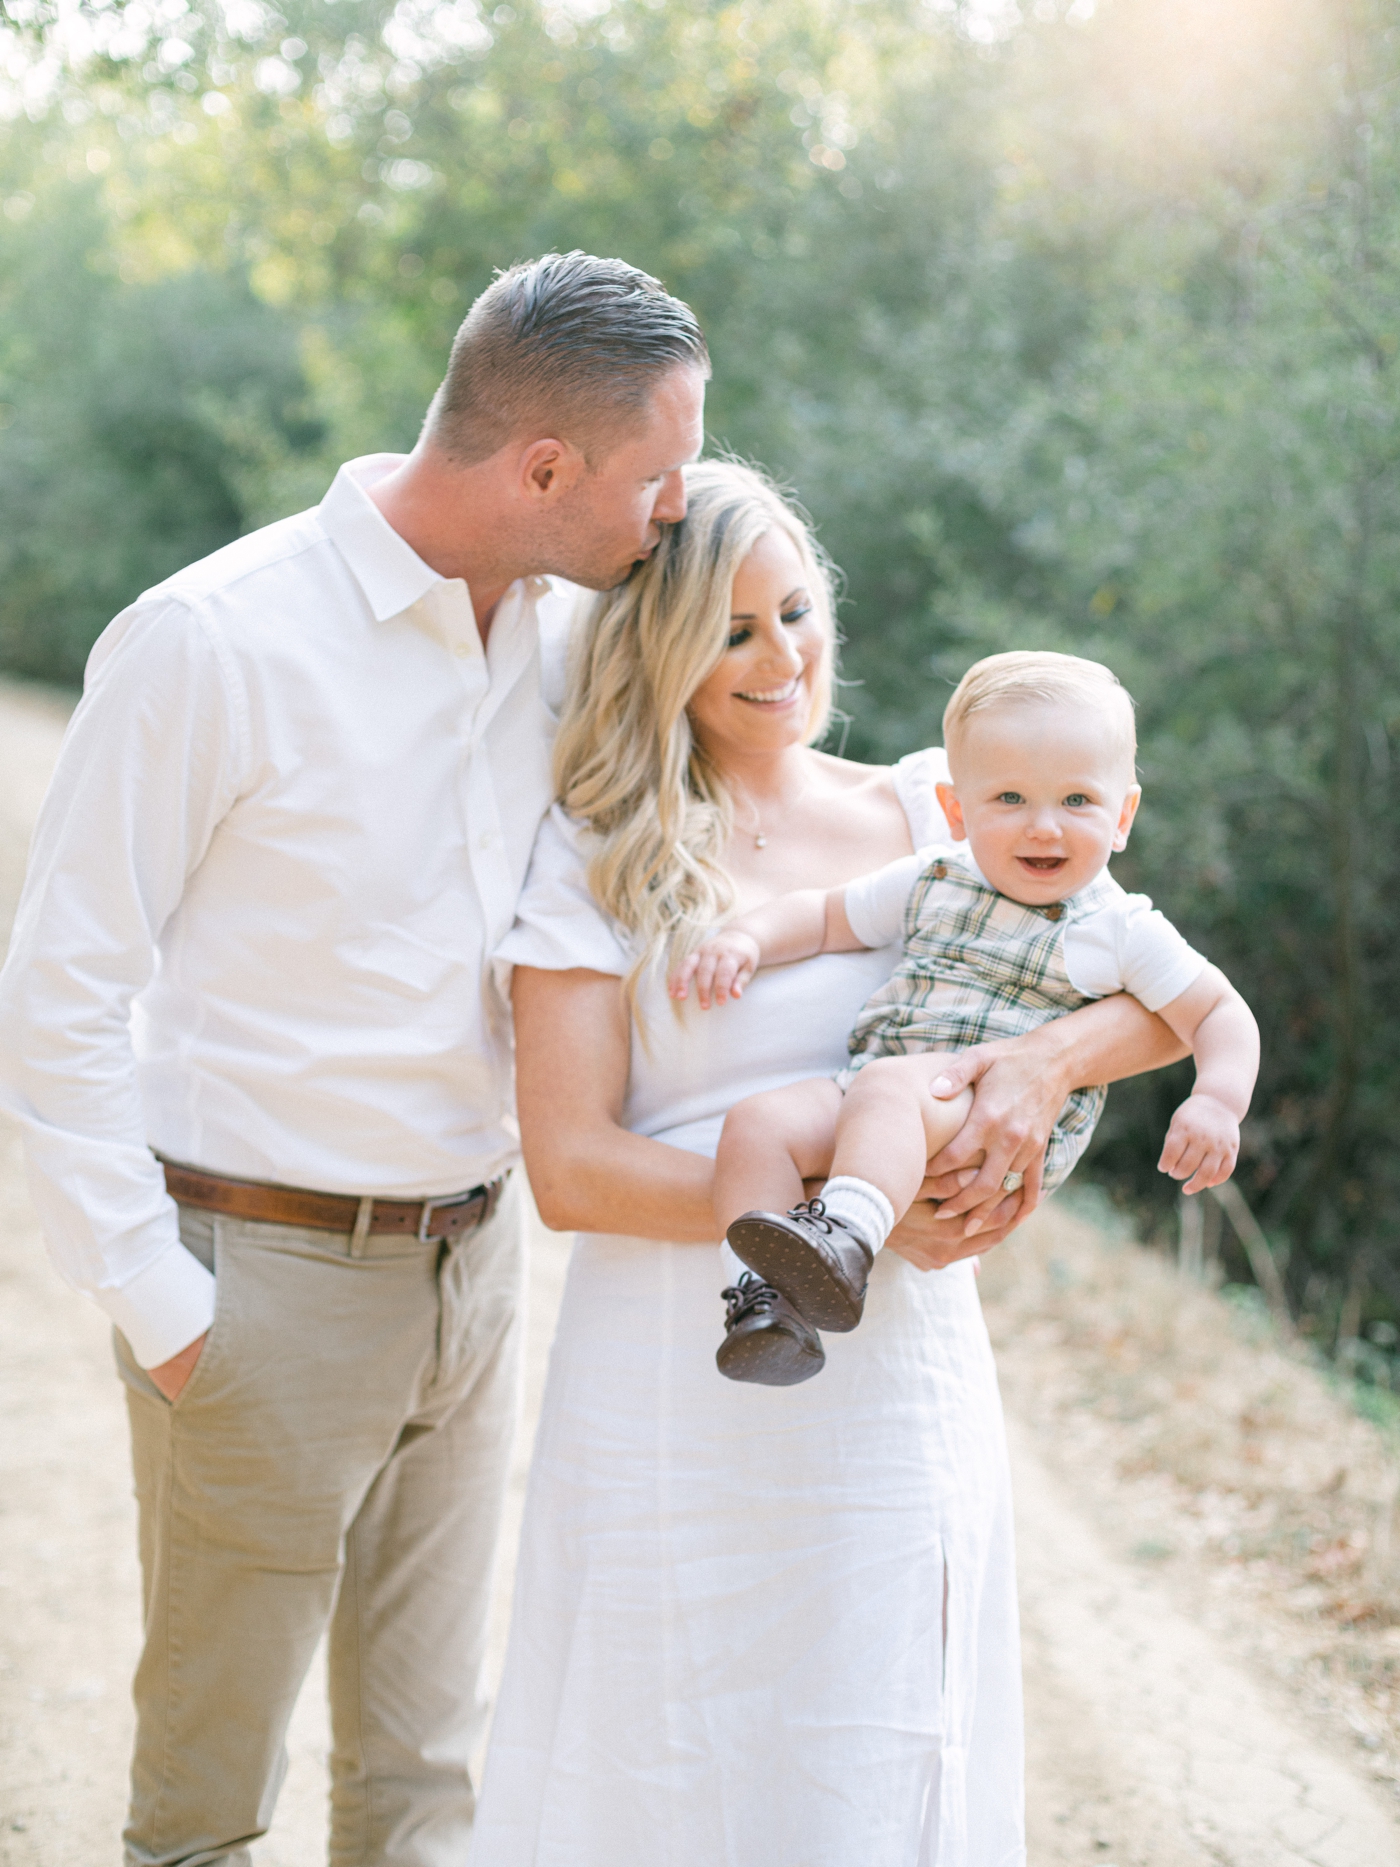 Castro Valley family session by Jenny Soi Photography